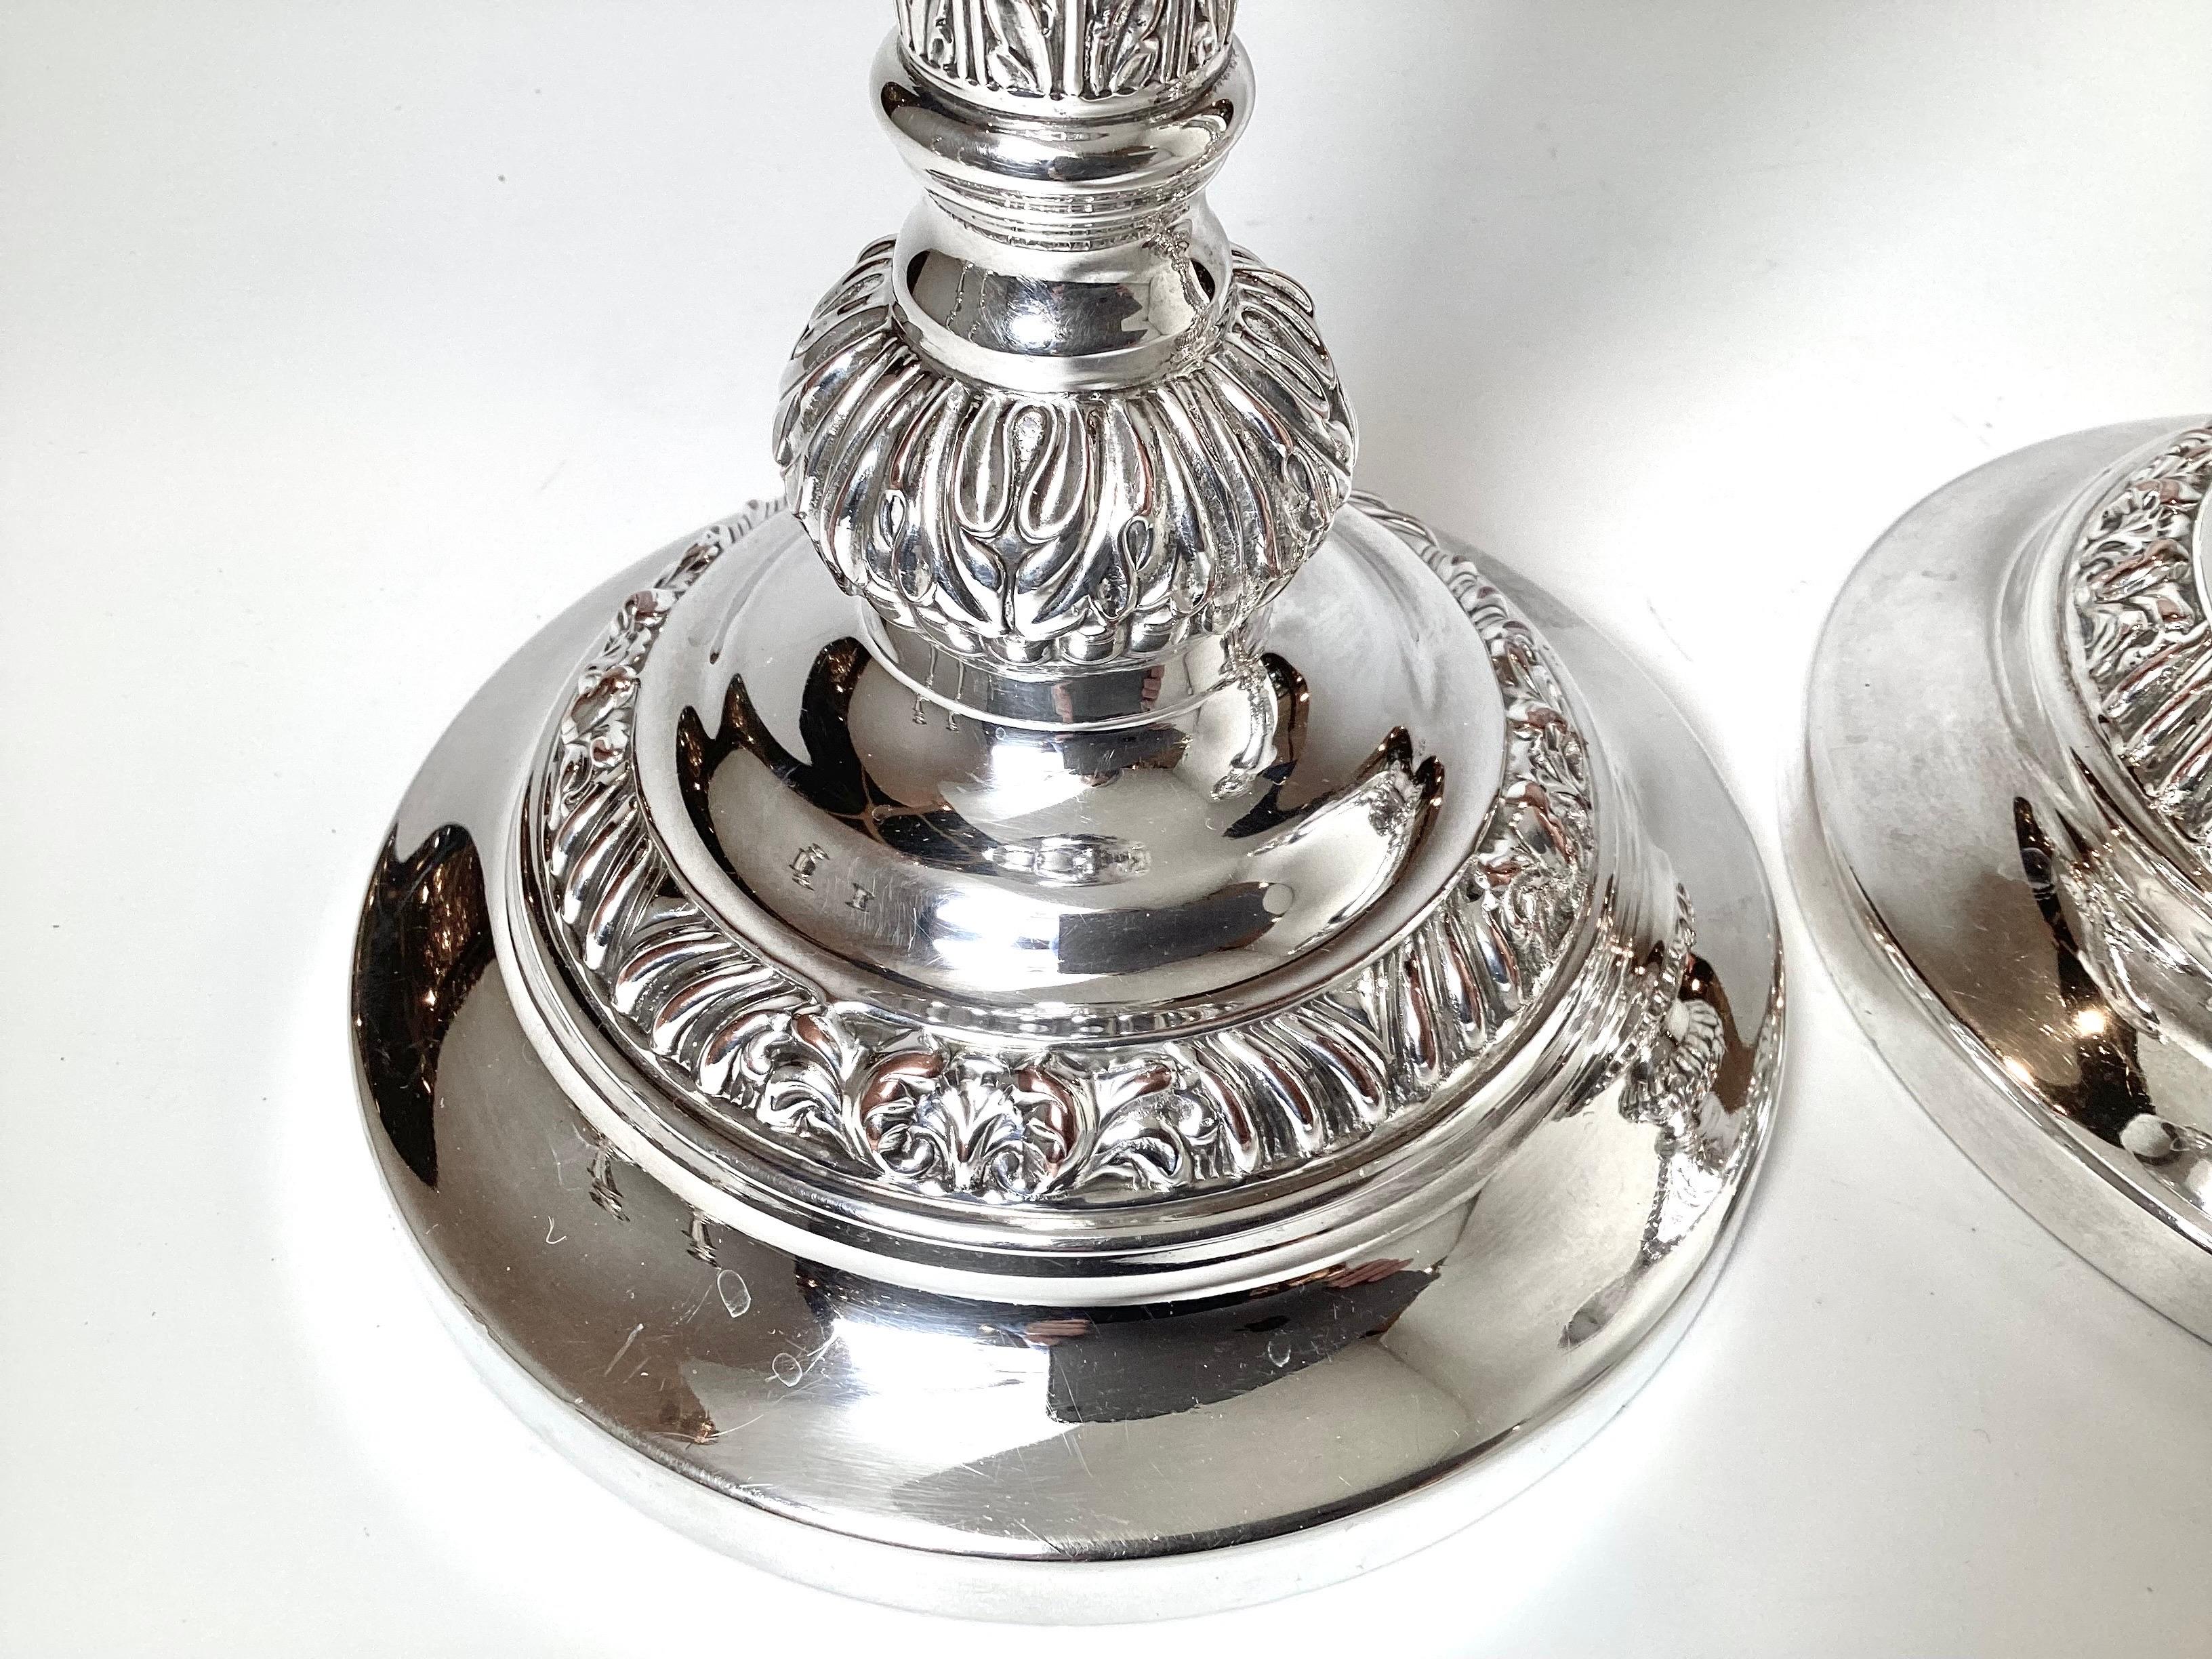 A handsome pair of larger English silver plate candlesticks with chase decoration. The height is 12.75 and 6.25 inches wide. There is some minor copper bleed on the high spots.